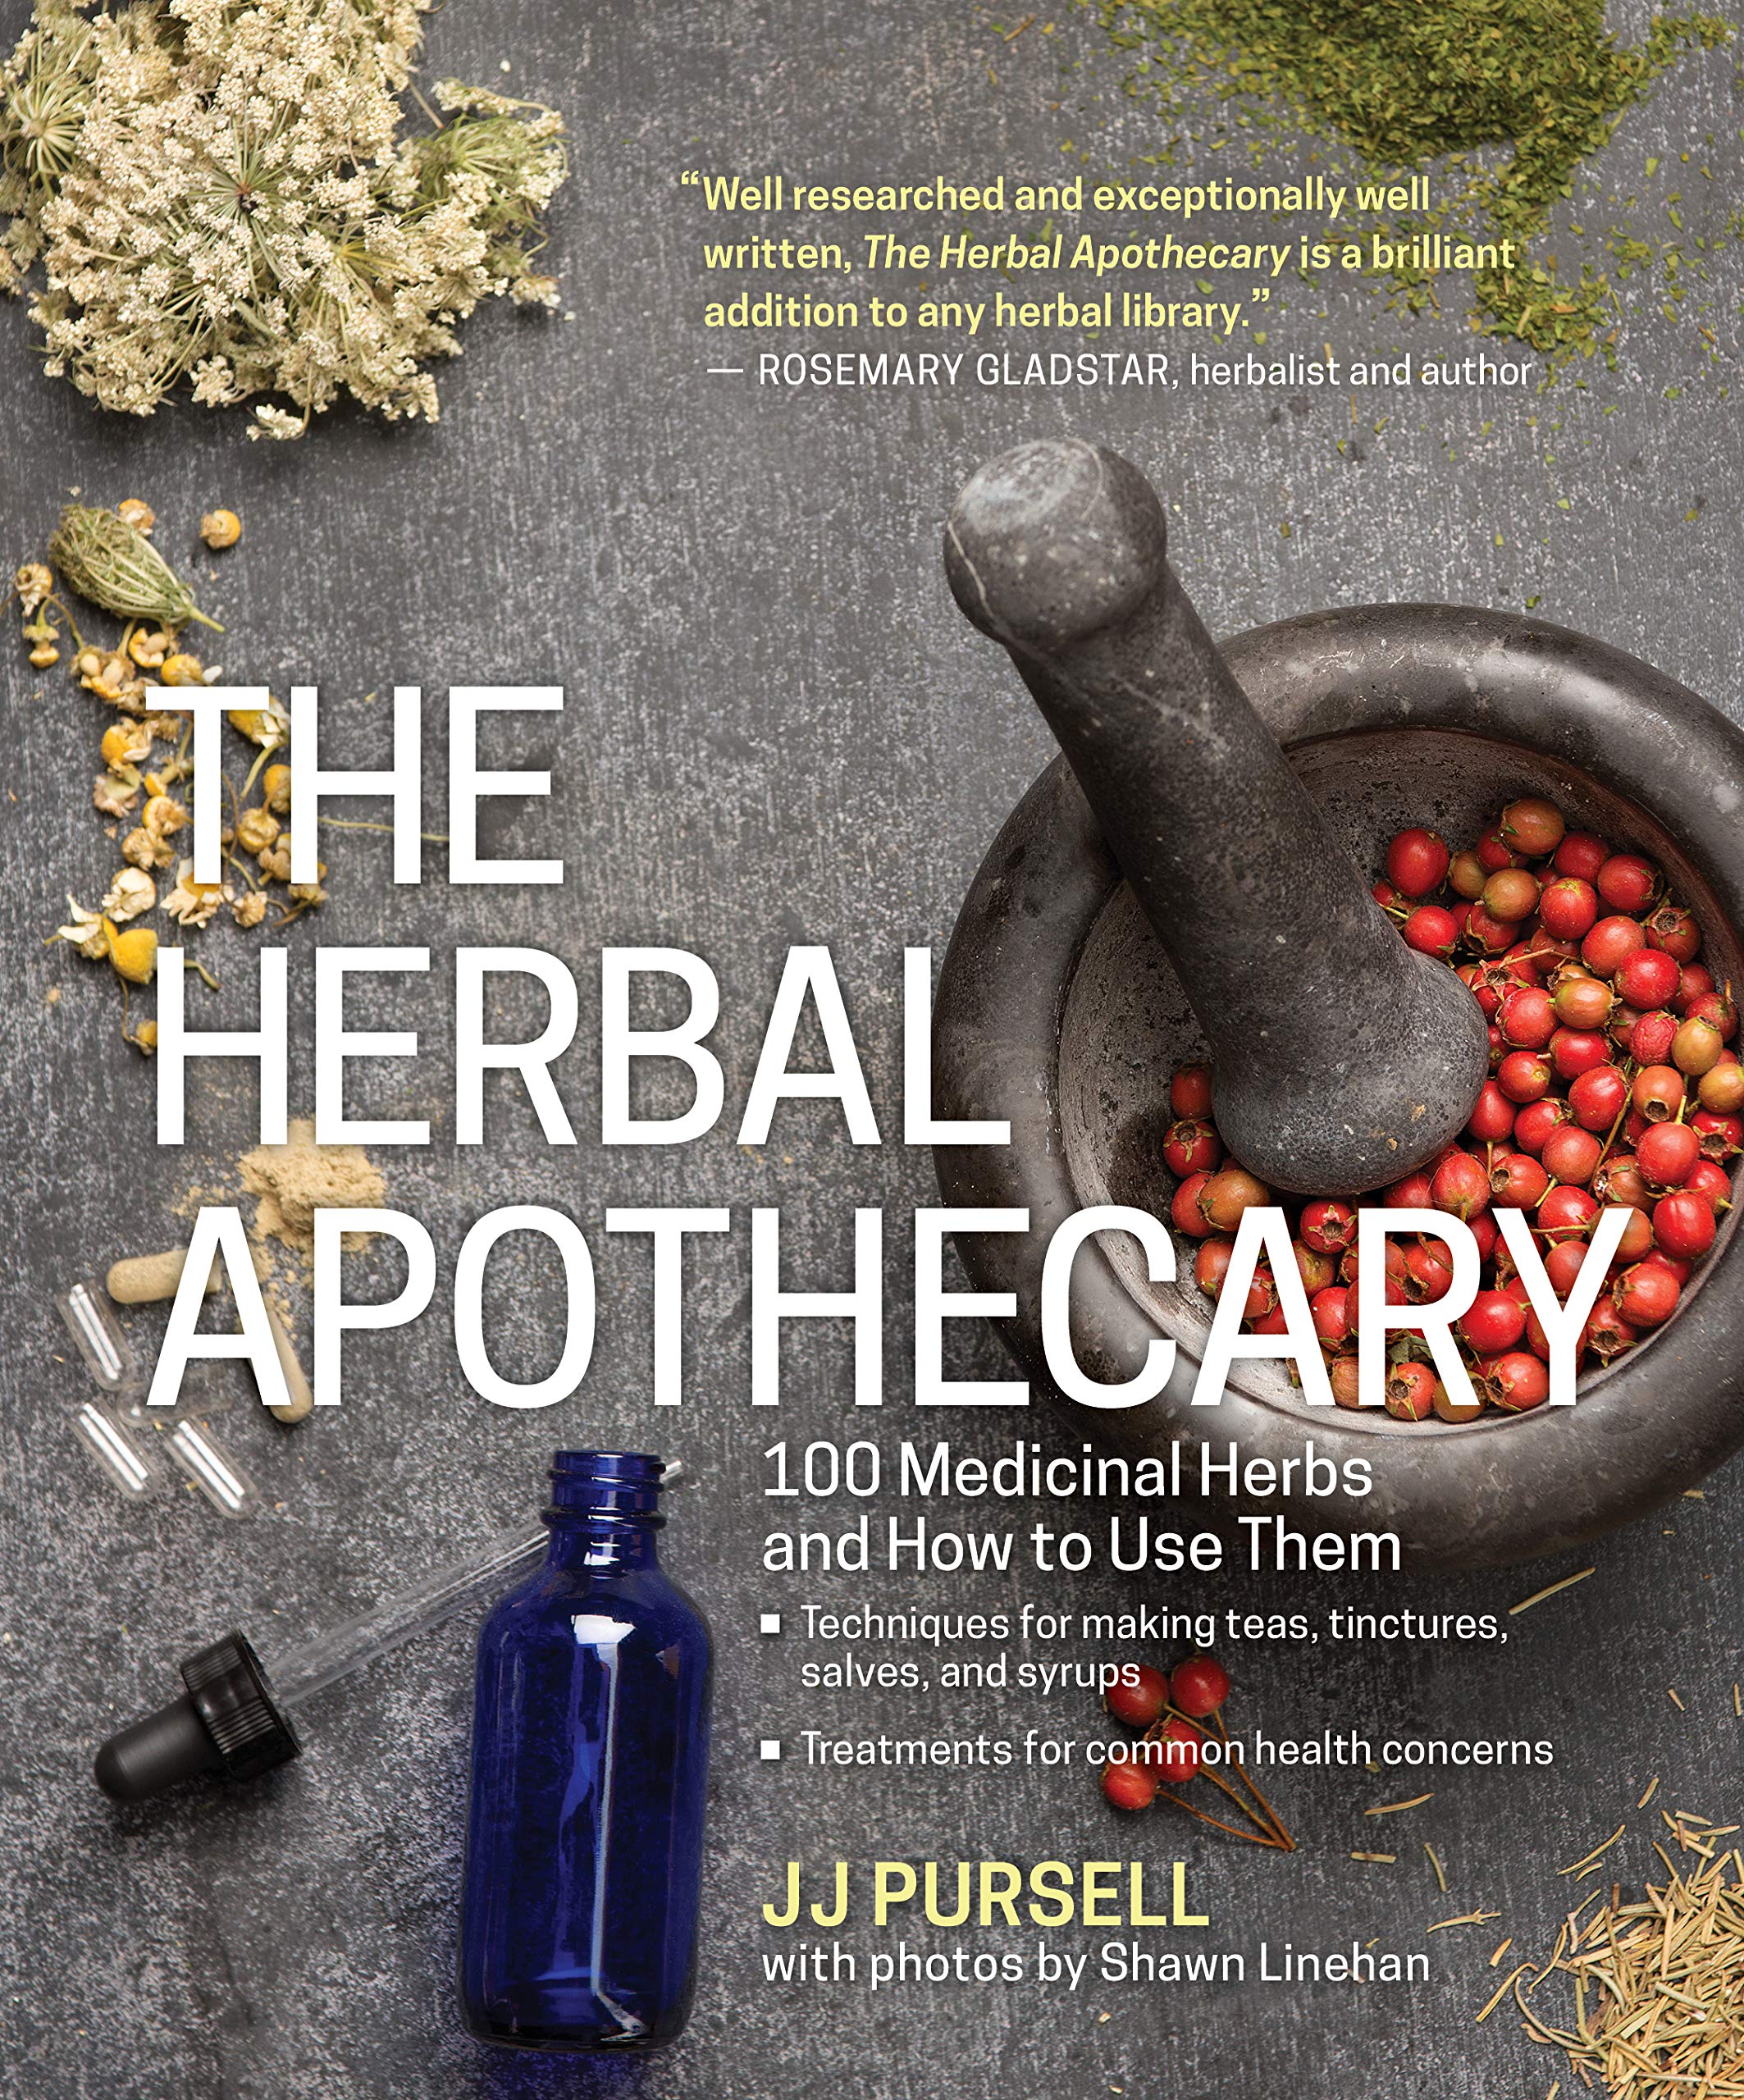 The Herbal Apothecary: 100 Medicinal Herbs and How to Use Them (JJ Pursell)